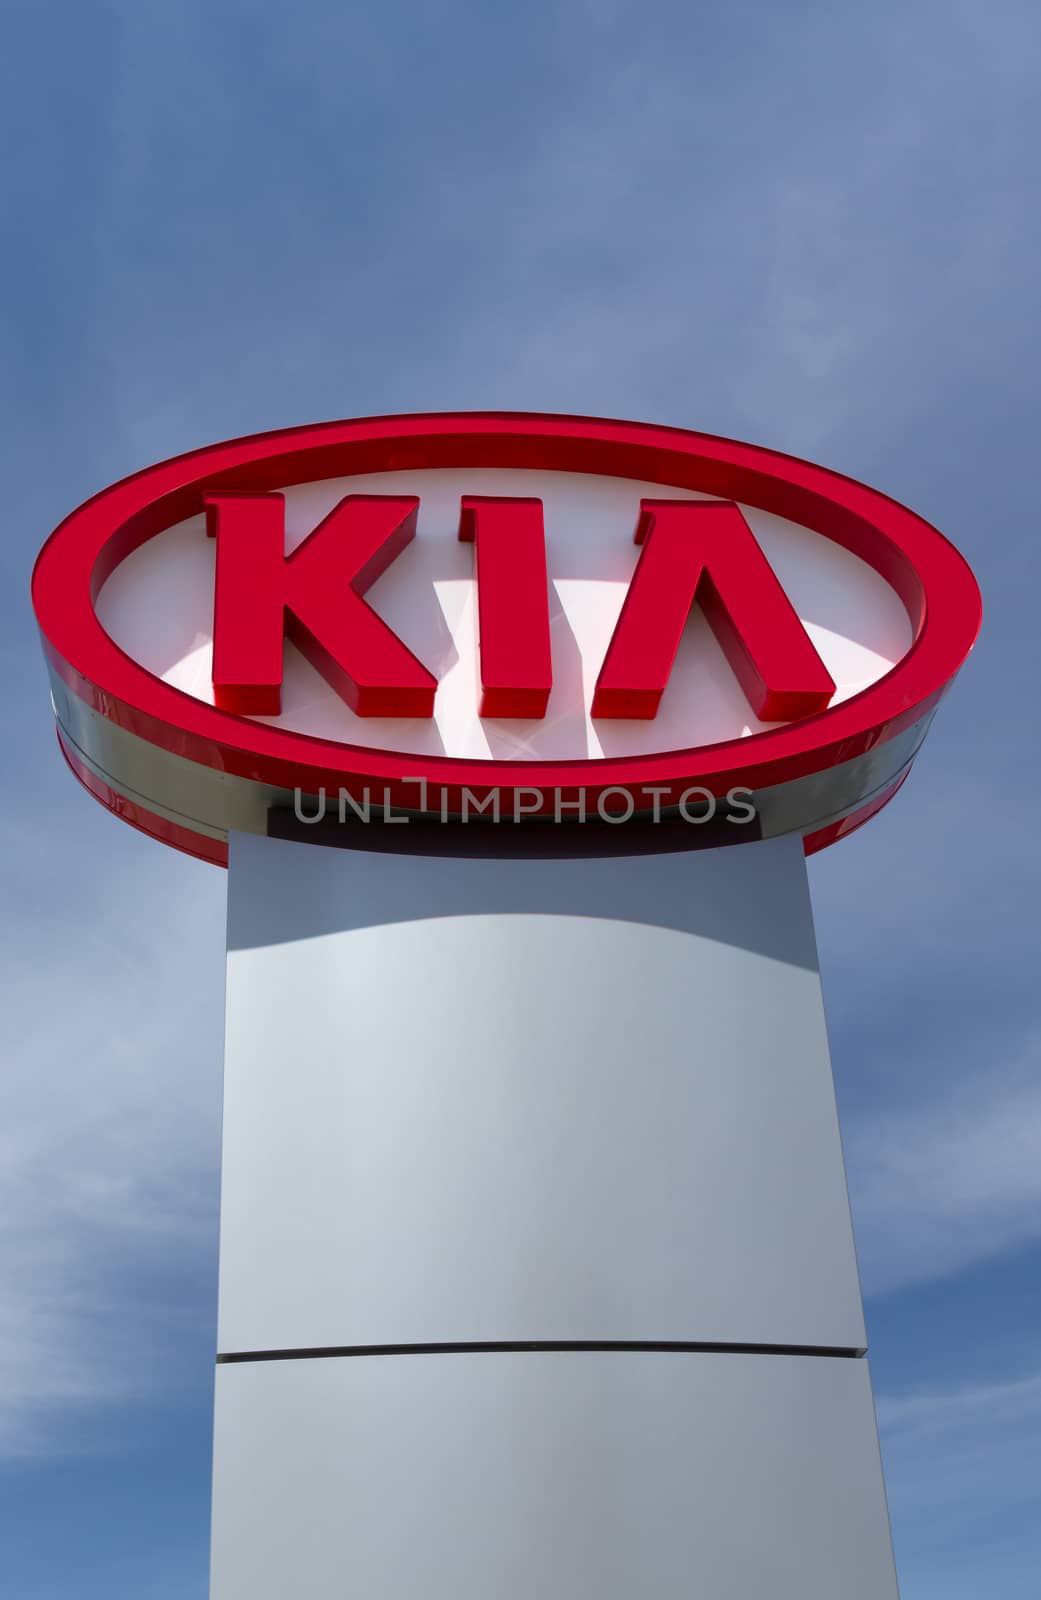 SAN JOSE,CA/USA - MAY 24, 2014: Kia Autombile Dealership Sign. Kia is a South Korean manufacturer of automobiles and commercial vehicles.